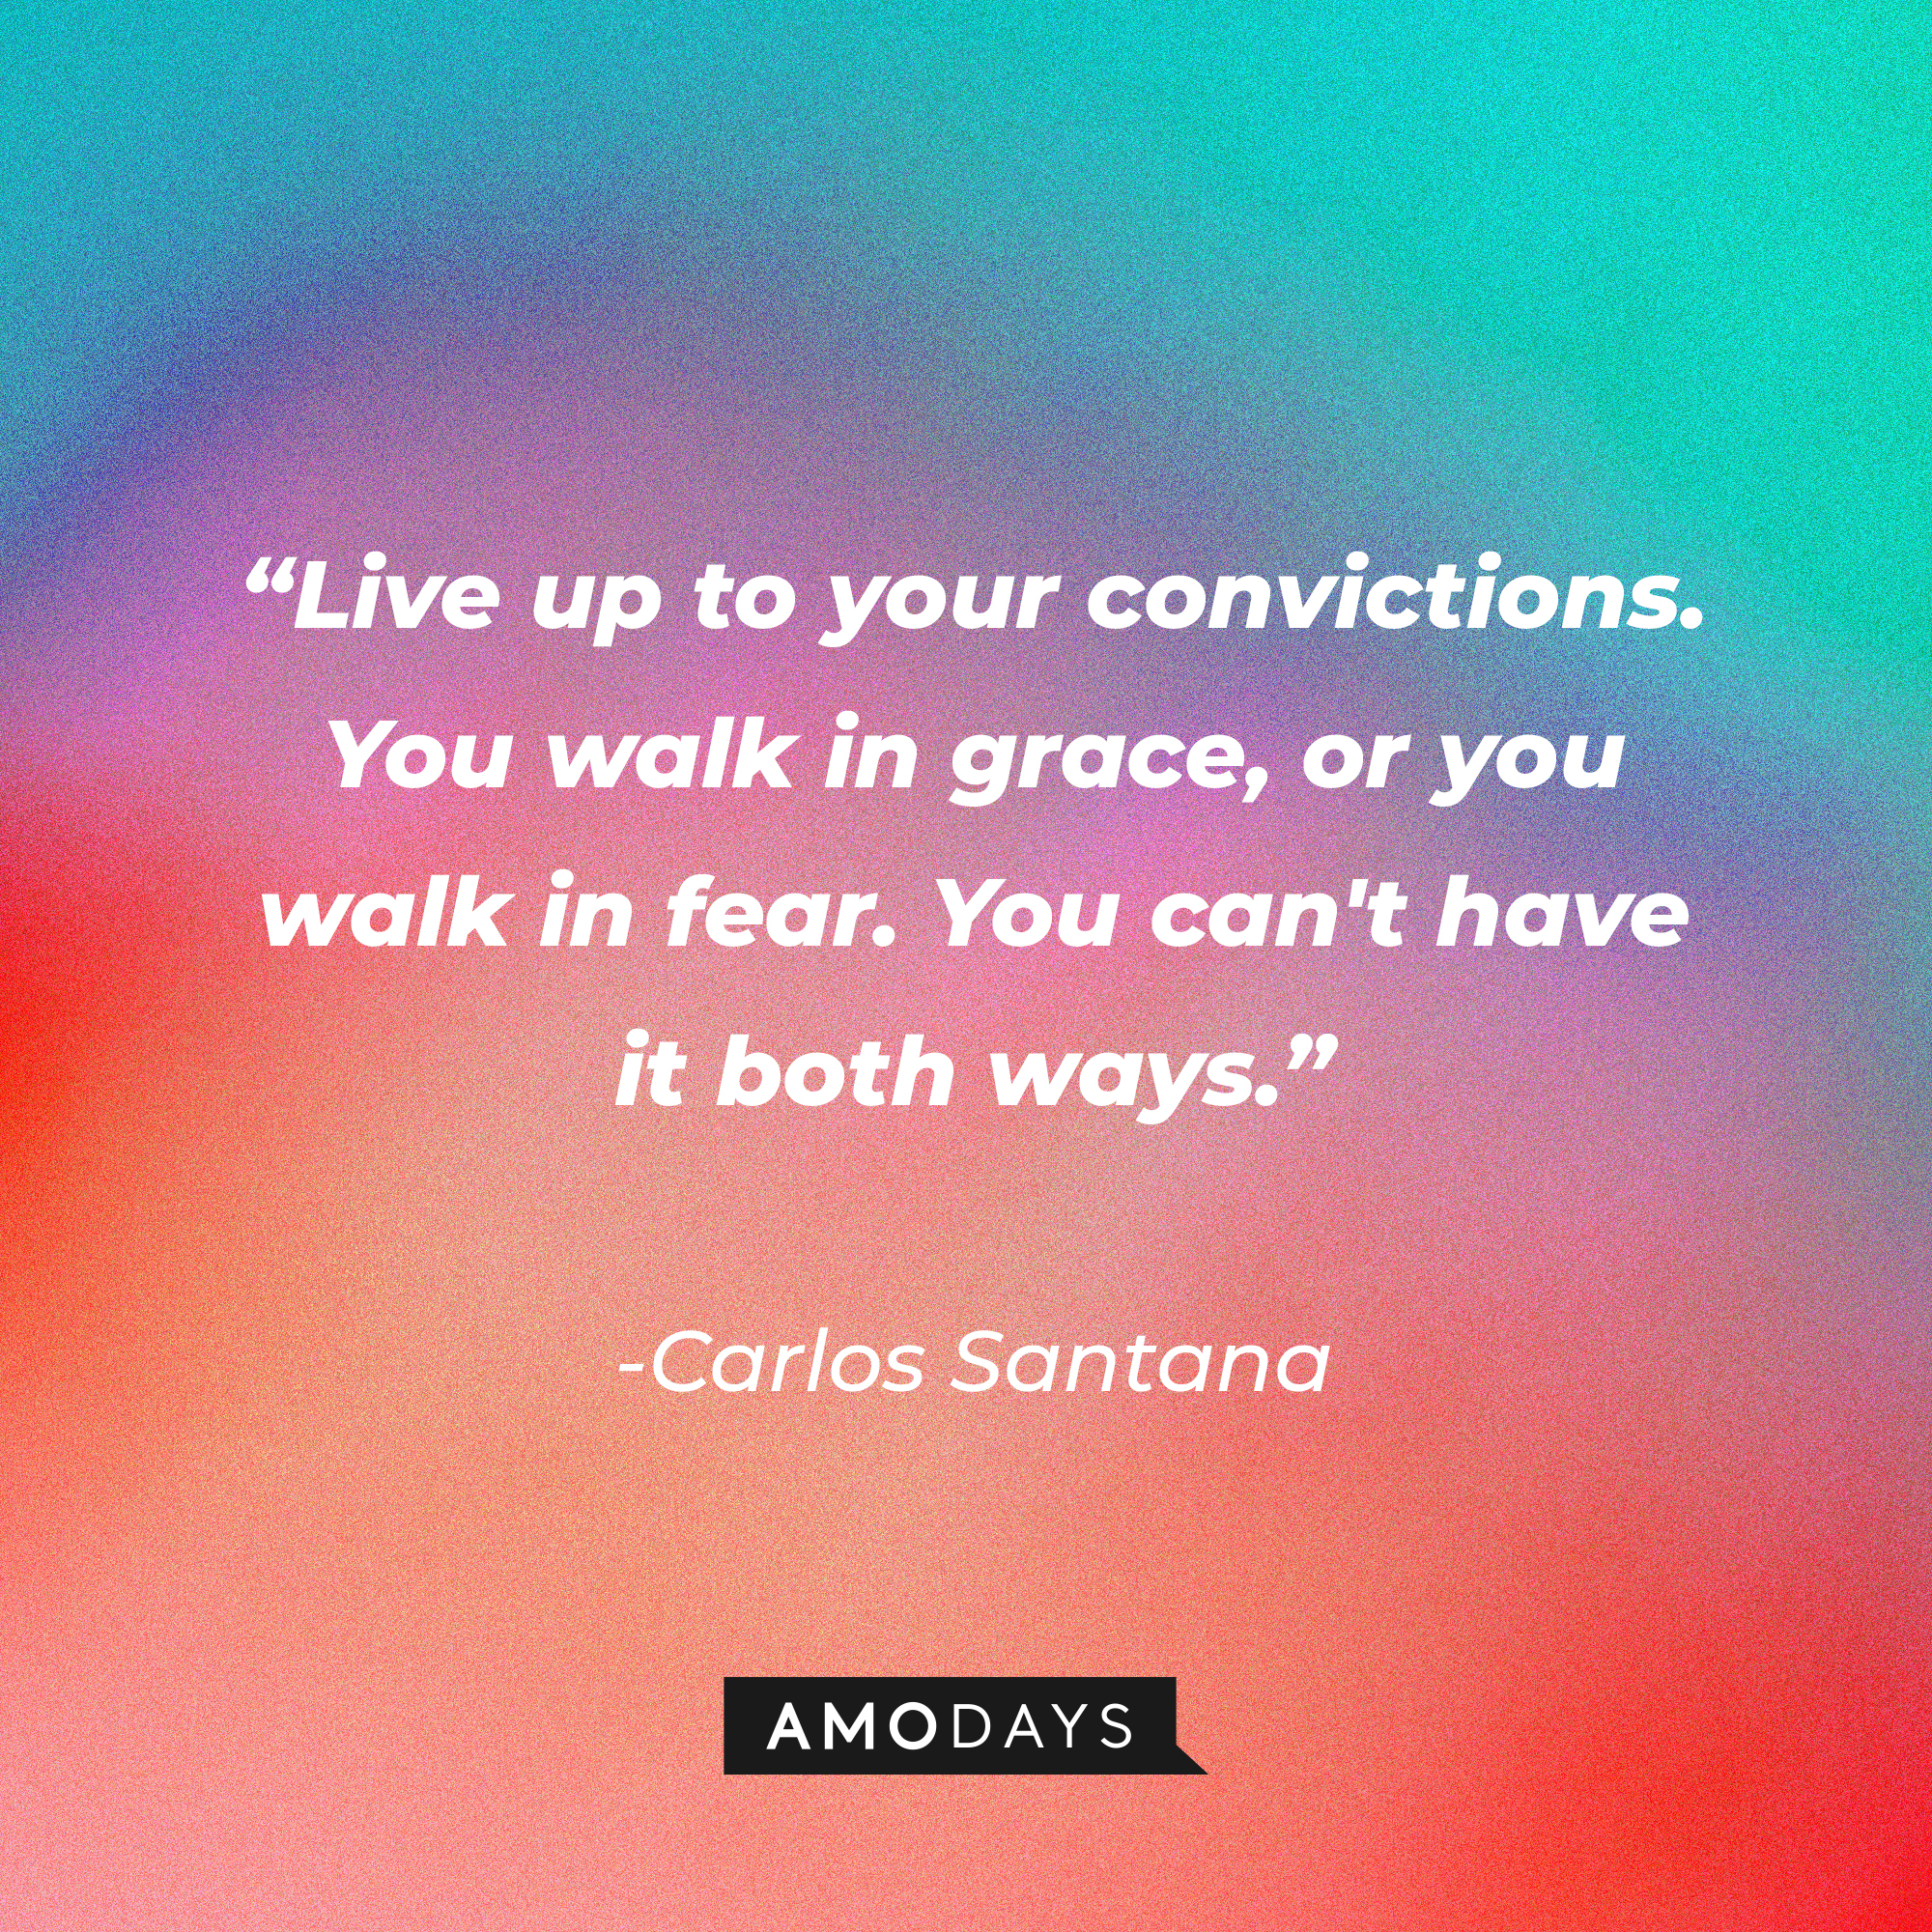 Carlos Santana’s quote: “Live up to your convictions. You walk in grace or you walk in fear. You can't have it both ways.” ┃Source: AmoDays